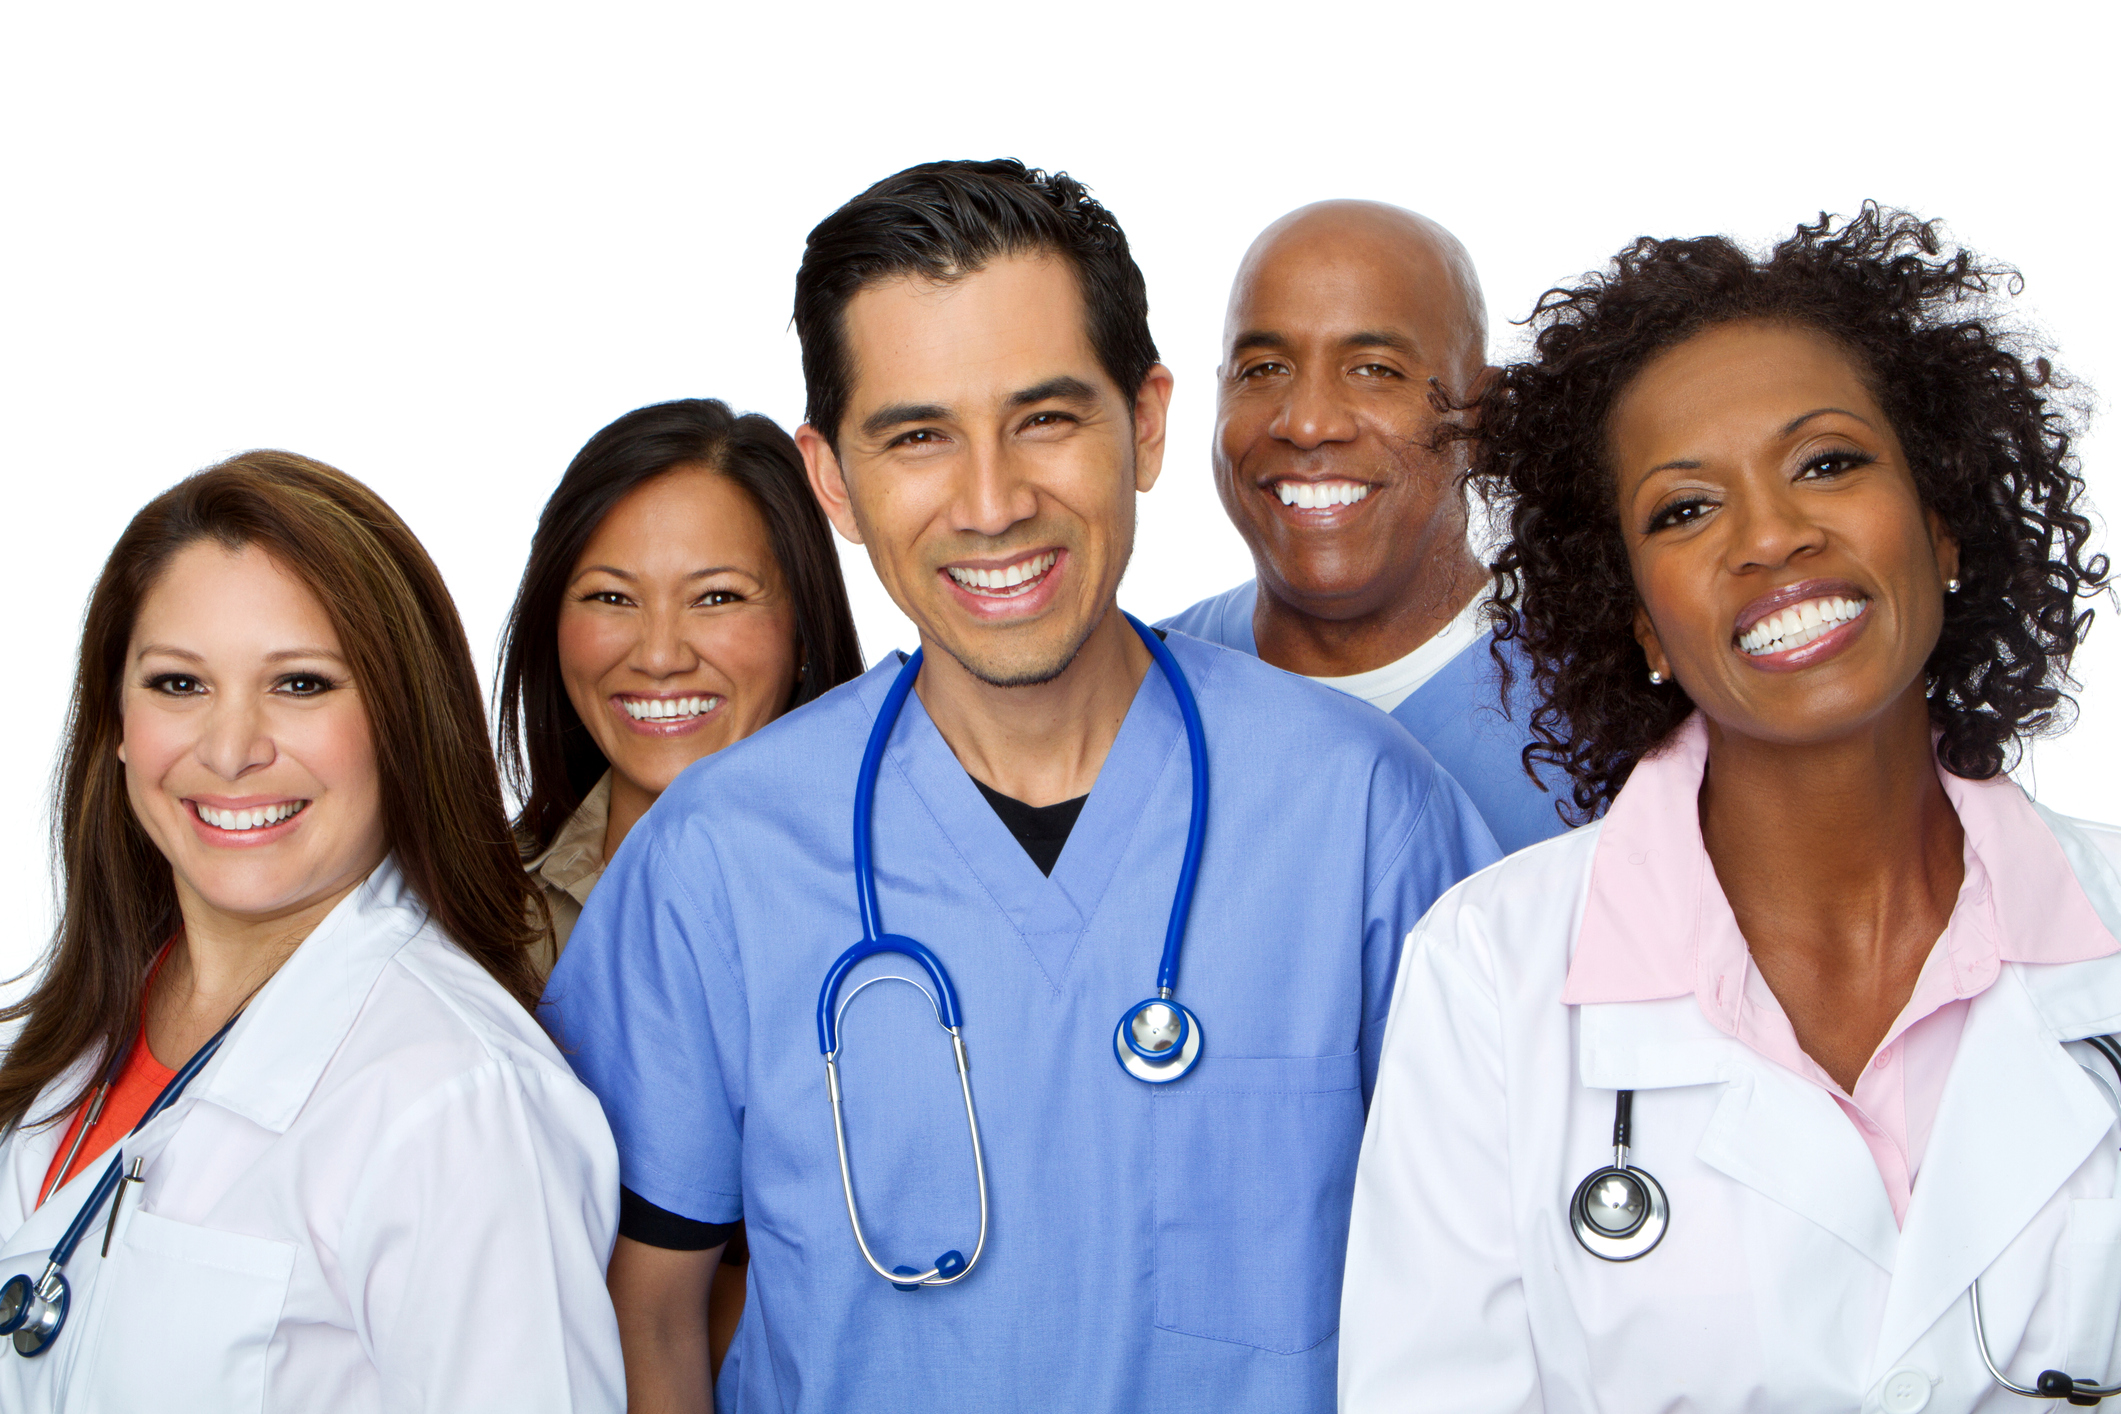 Life on a locum tenens assignment - a physician's perspective